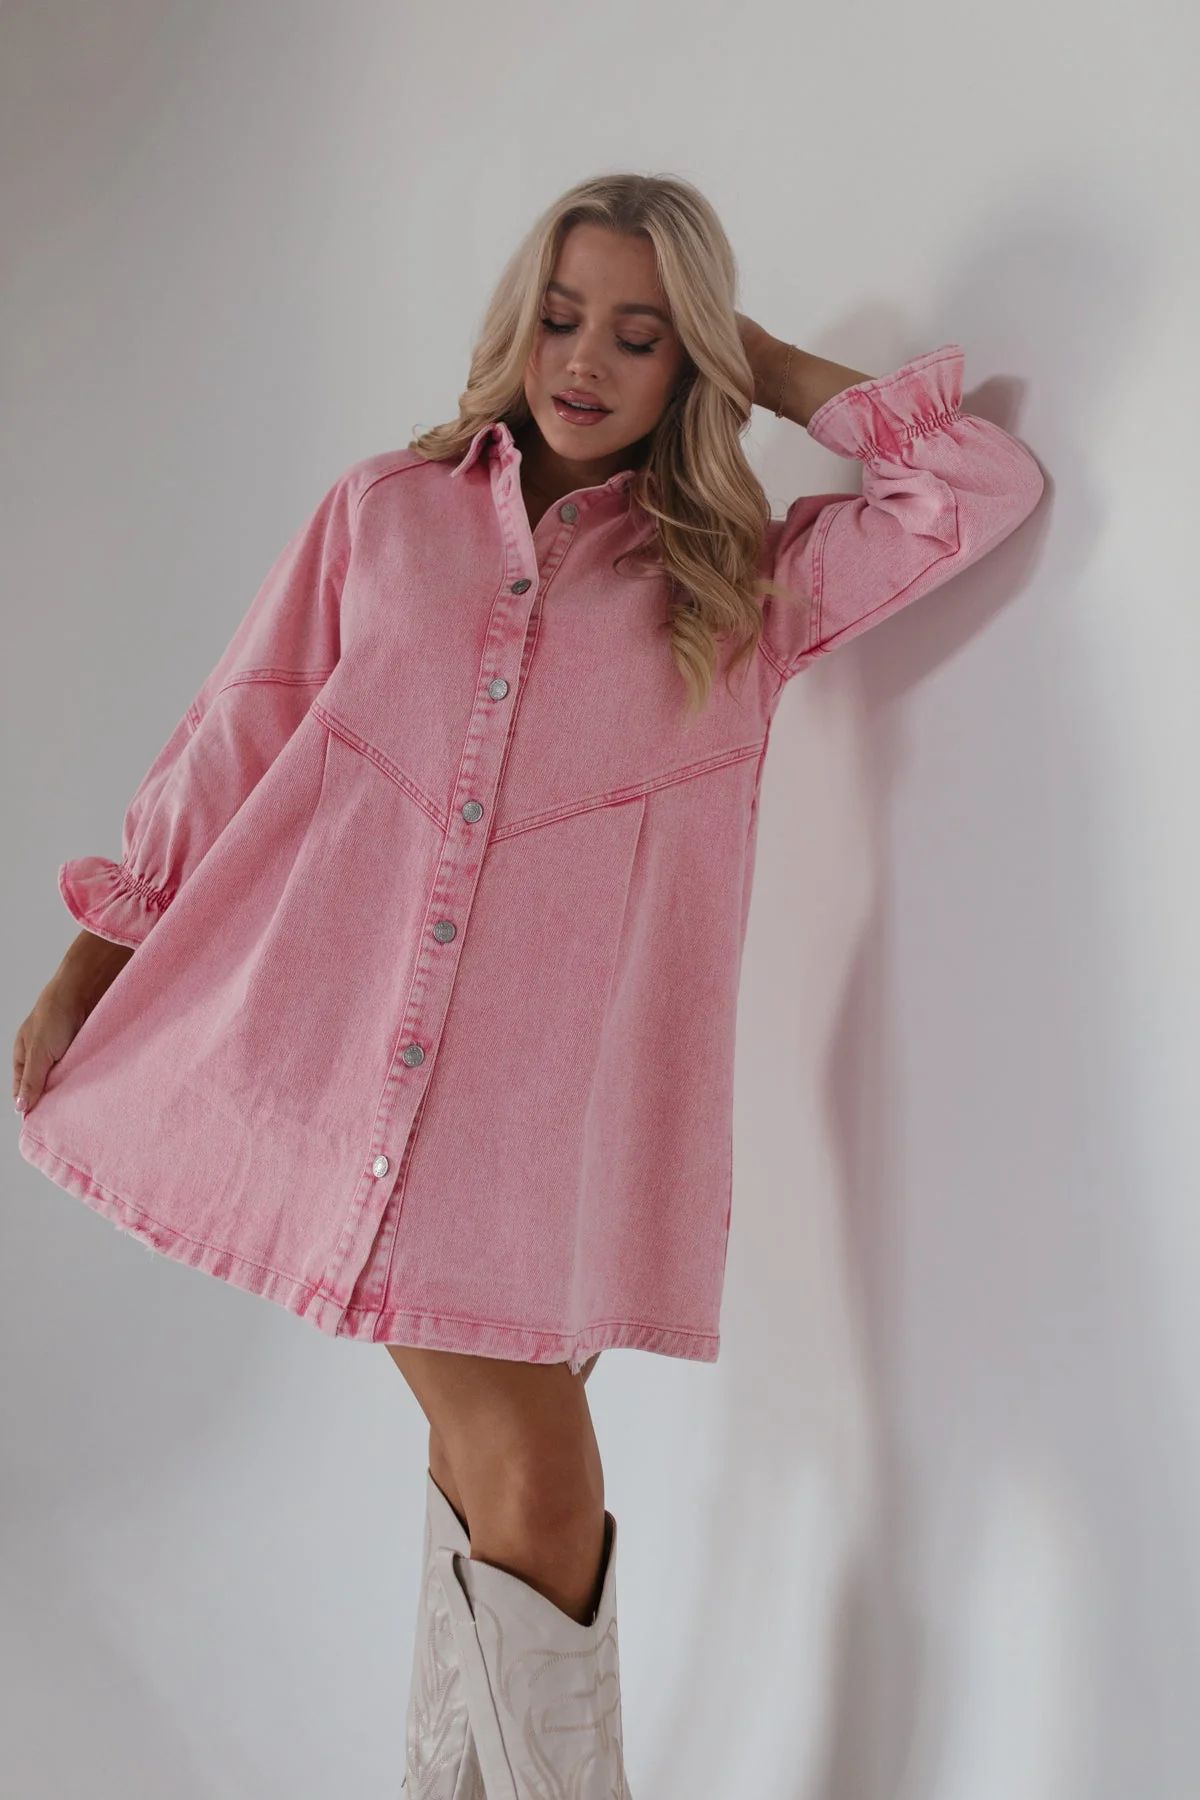 Presley Pink Button Down Dress | The Post